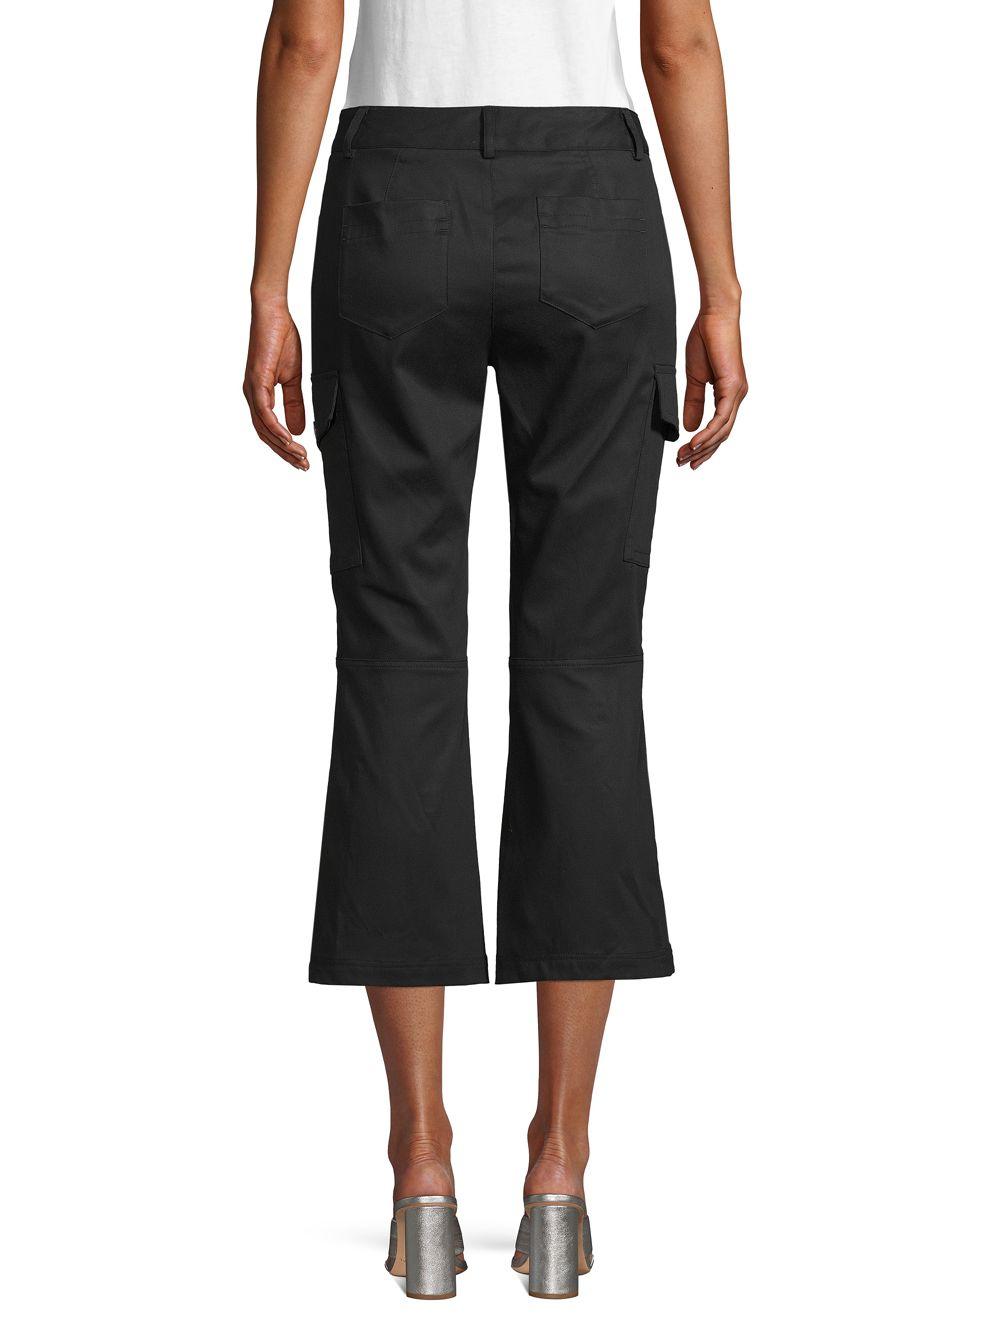 Laundry by Shelli Segal Cotton Classic Cropped Pants in Black - Lyst